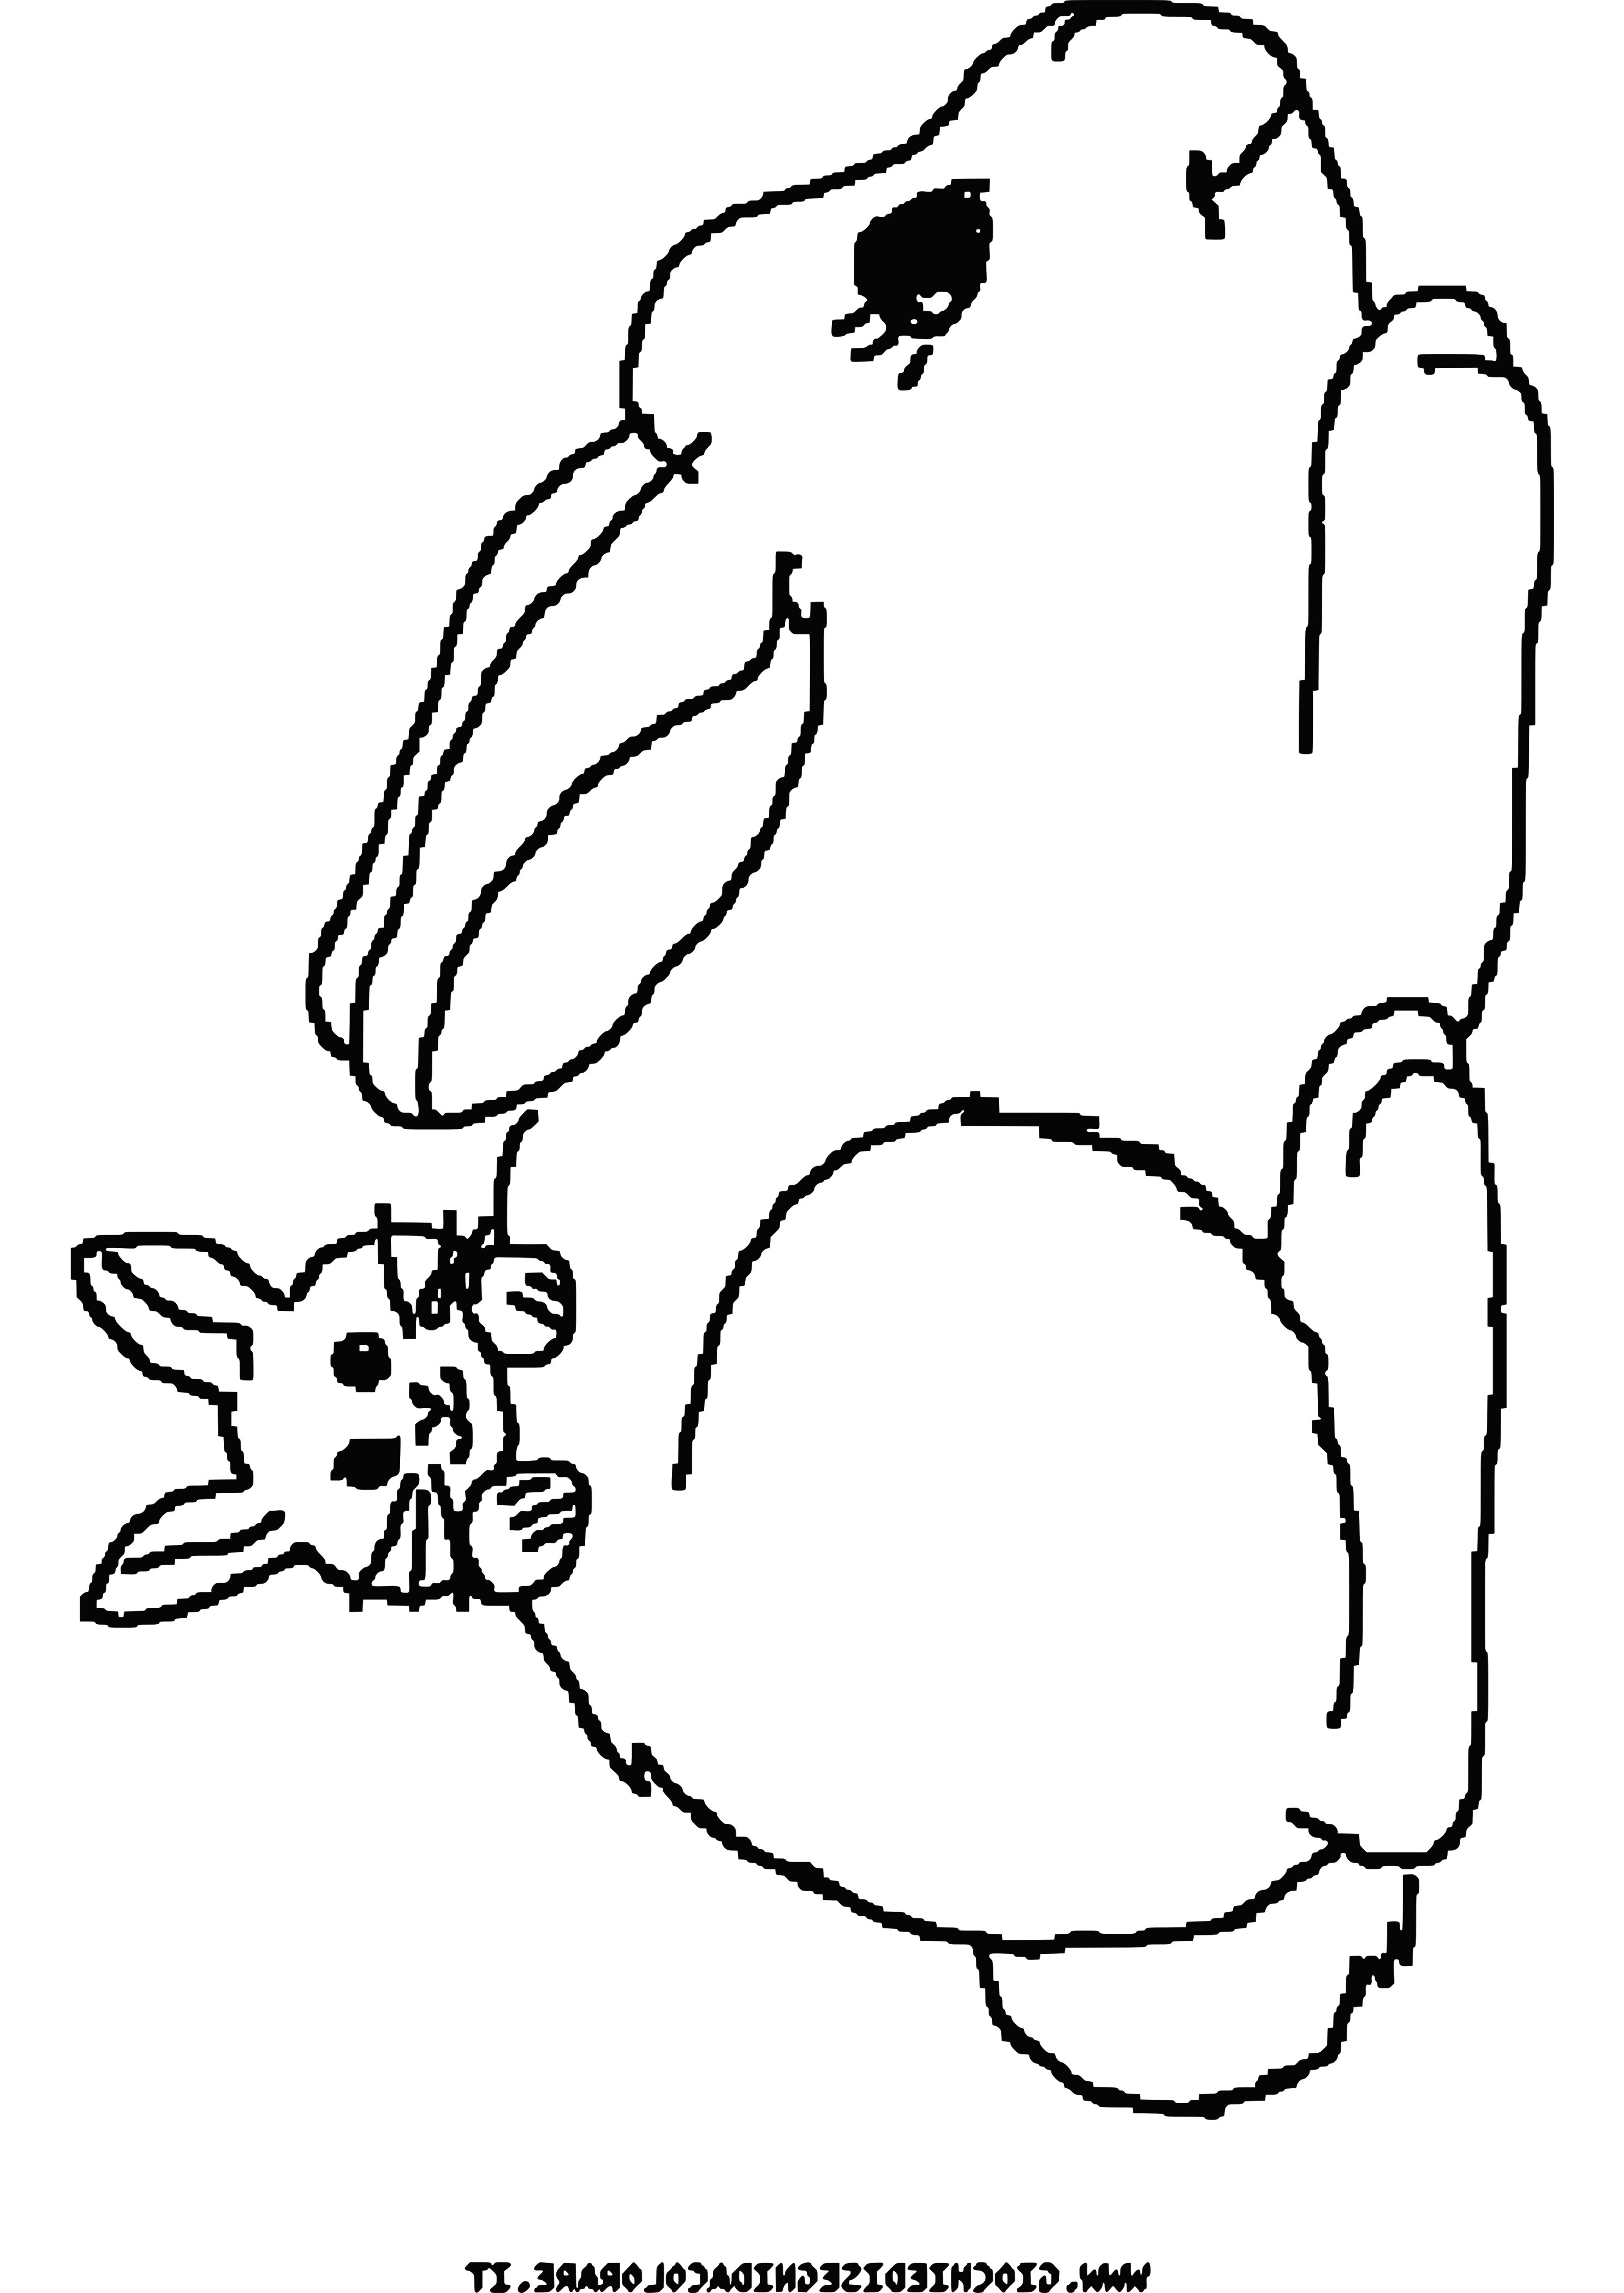 Dessin Cheval Simple Bestof Images Dessin Lapin Simple Mexicaindessin Download Avec Dessin